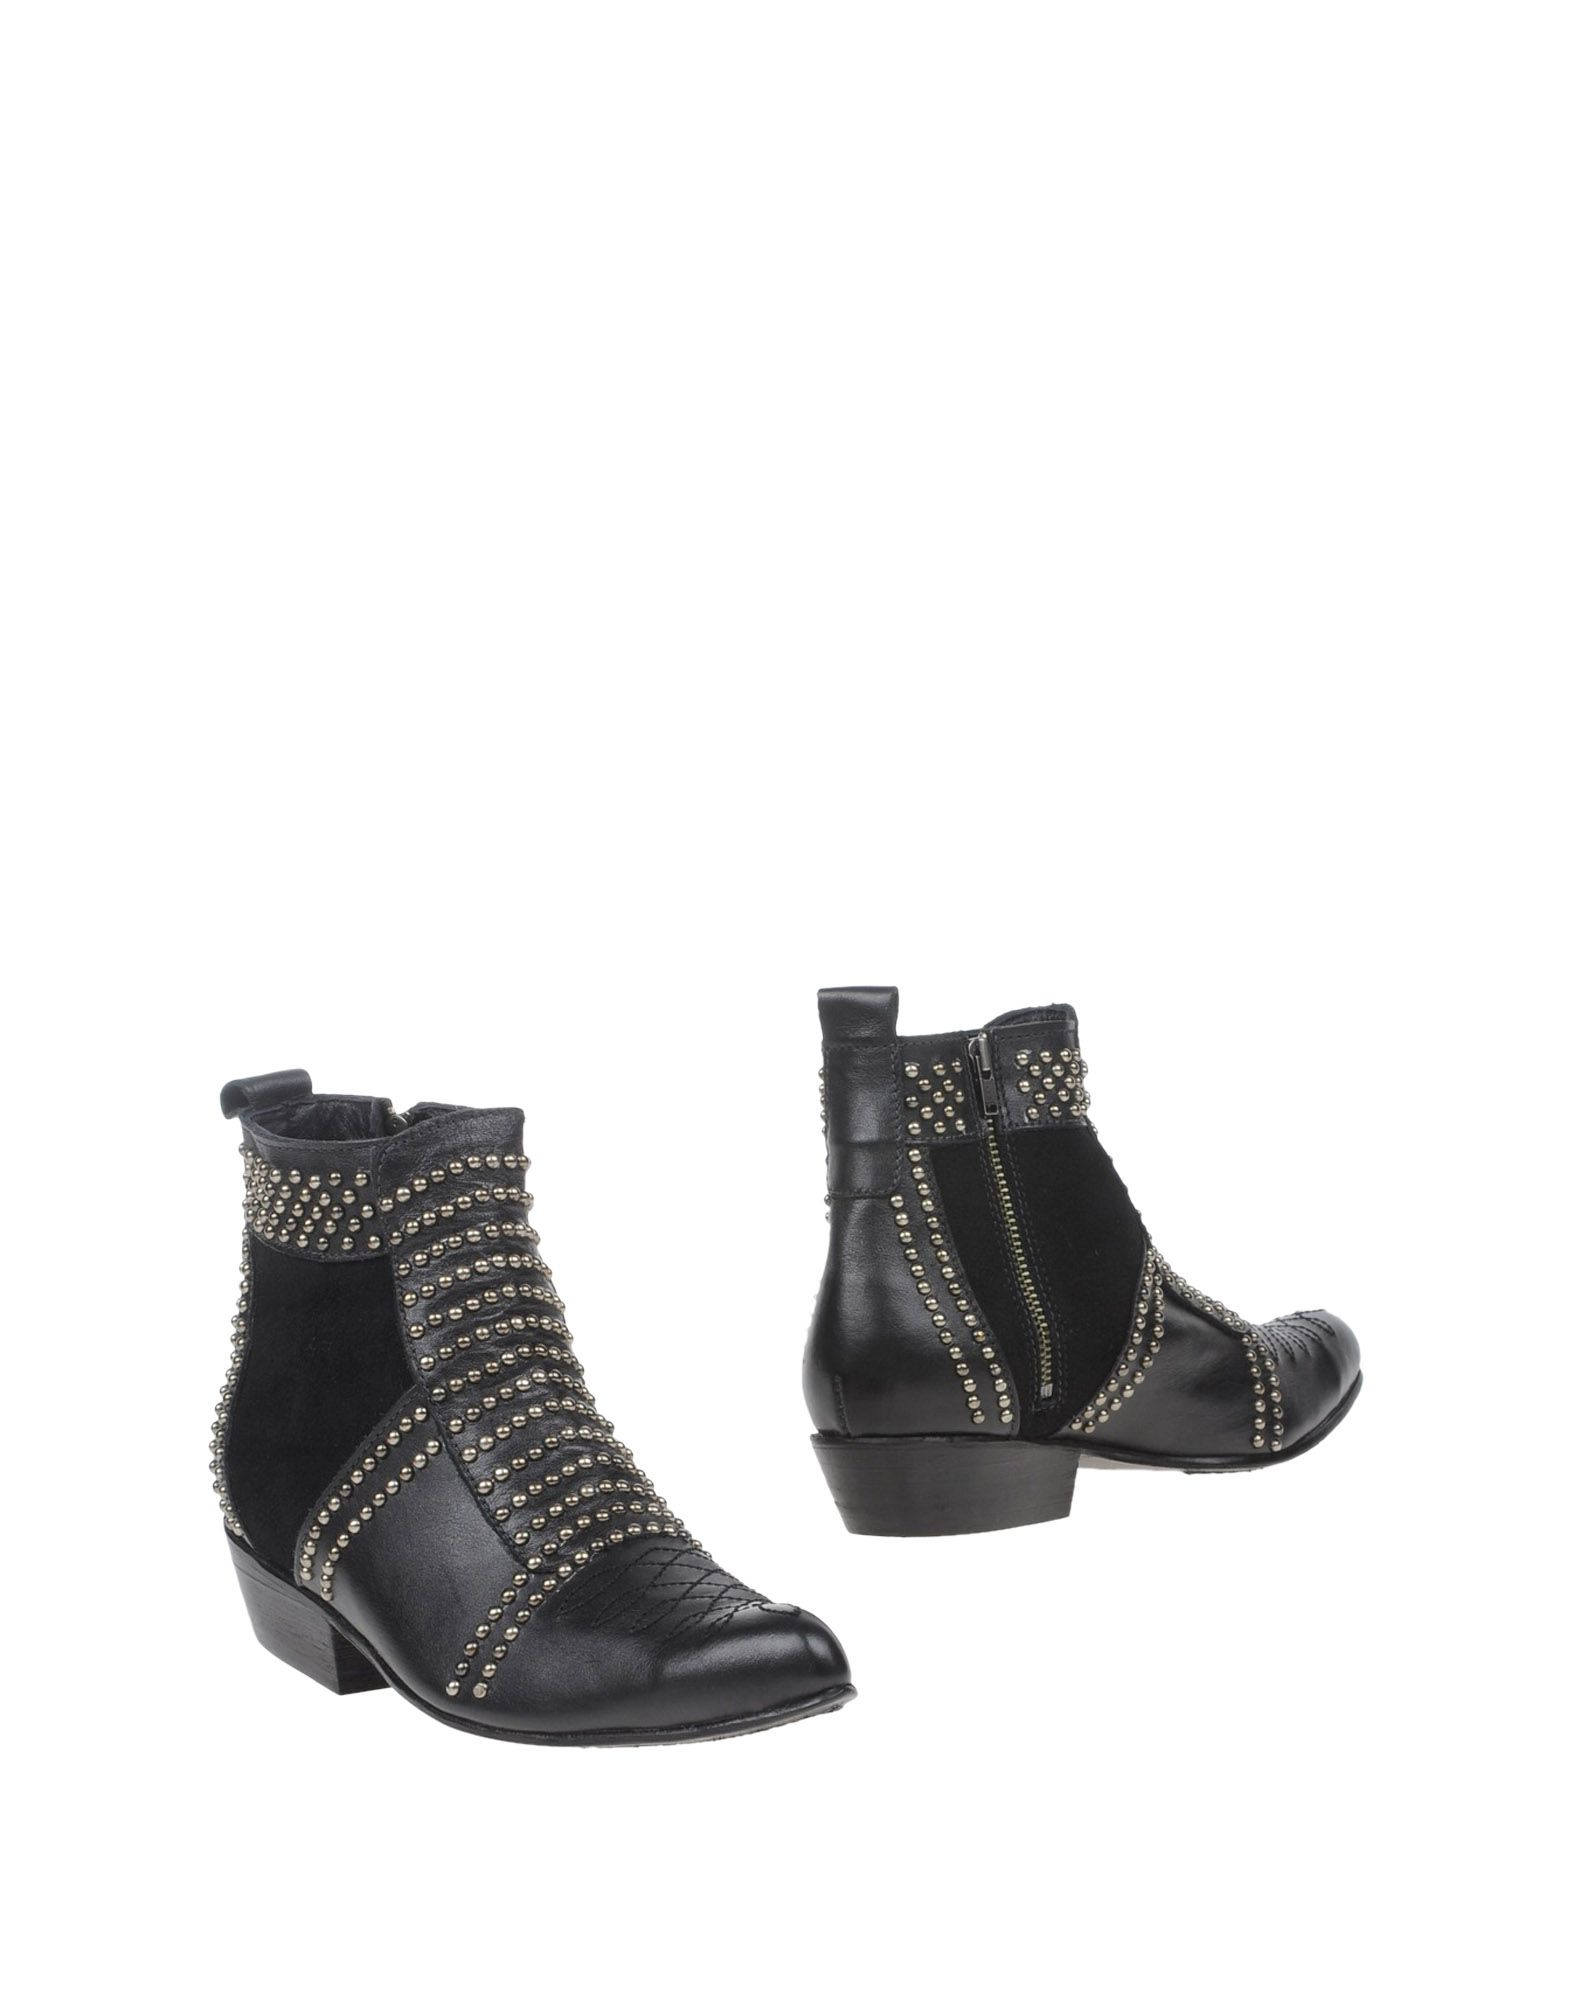 Lyst - Anine Bing Ankle Boots in Black